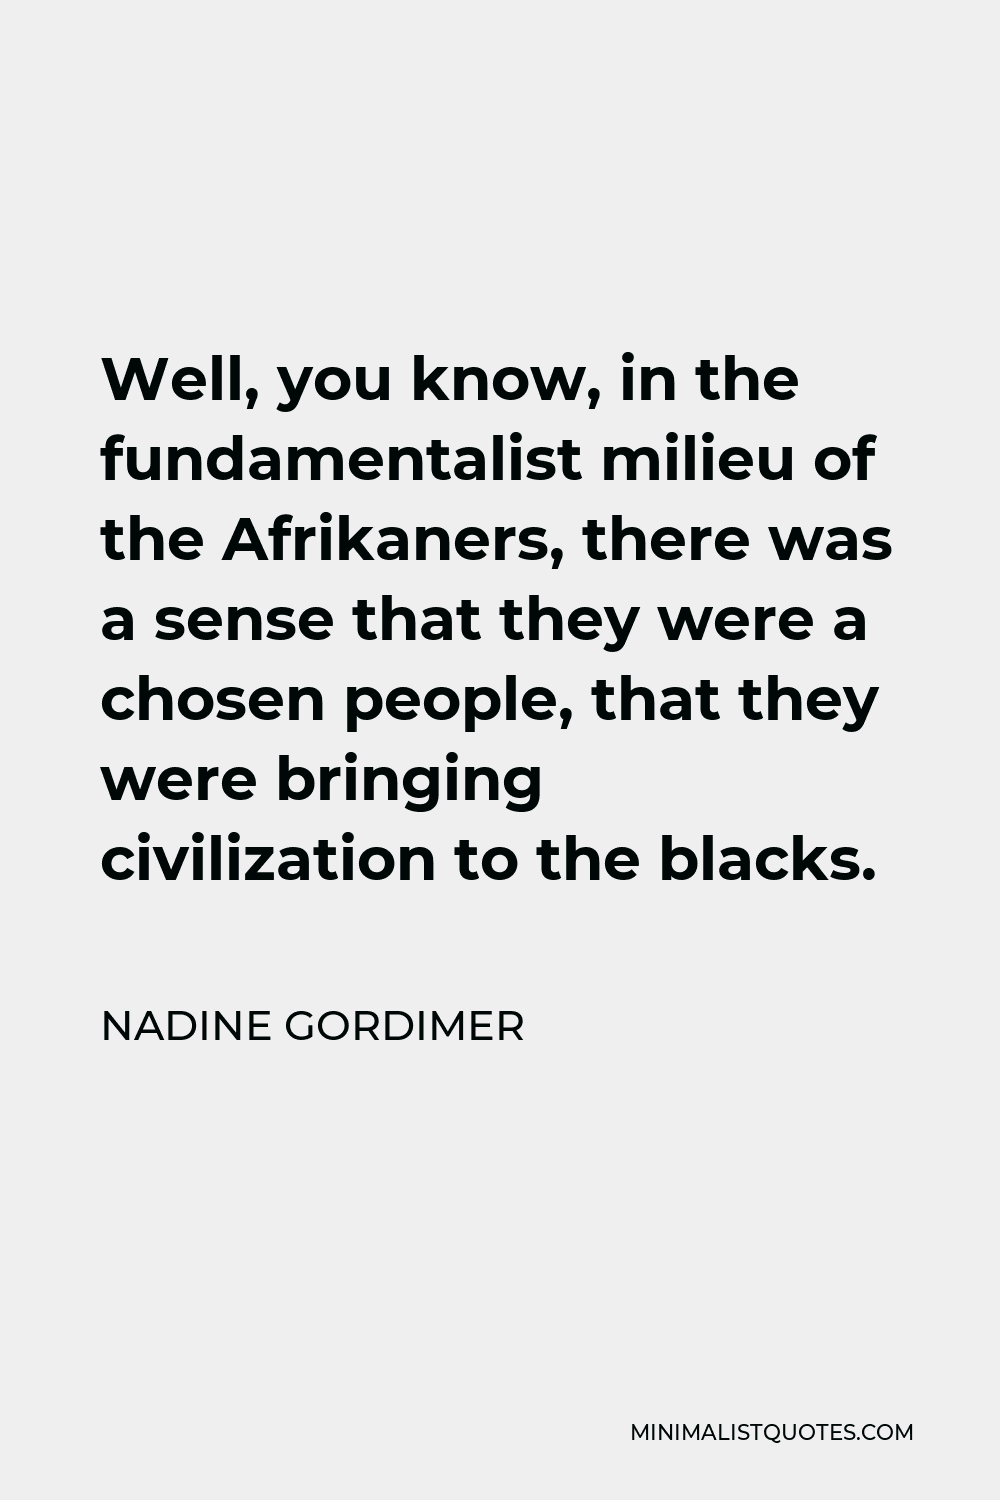 Nadine Gordimer Quote - Well, you know, in the fundamentalist milieu of the Afrikaners, there was a sense that they were a chosen people, that they were bringing civilization to the blacks.